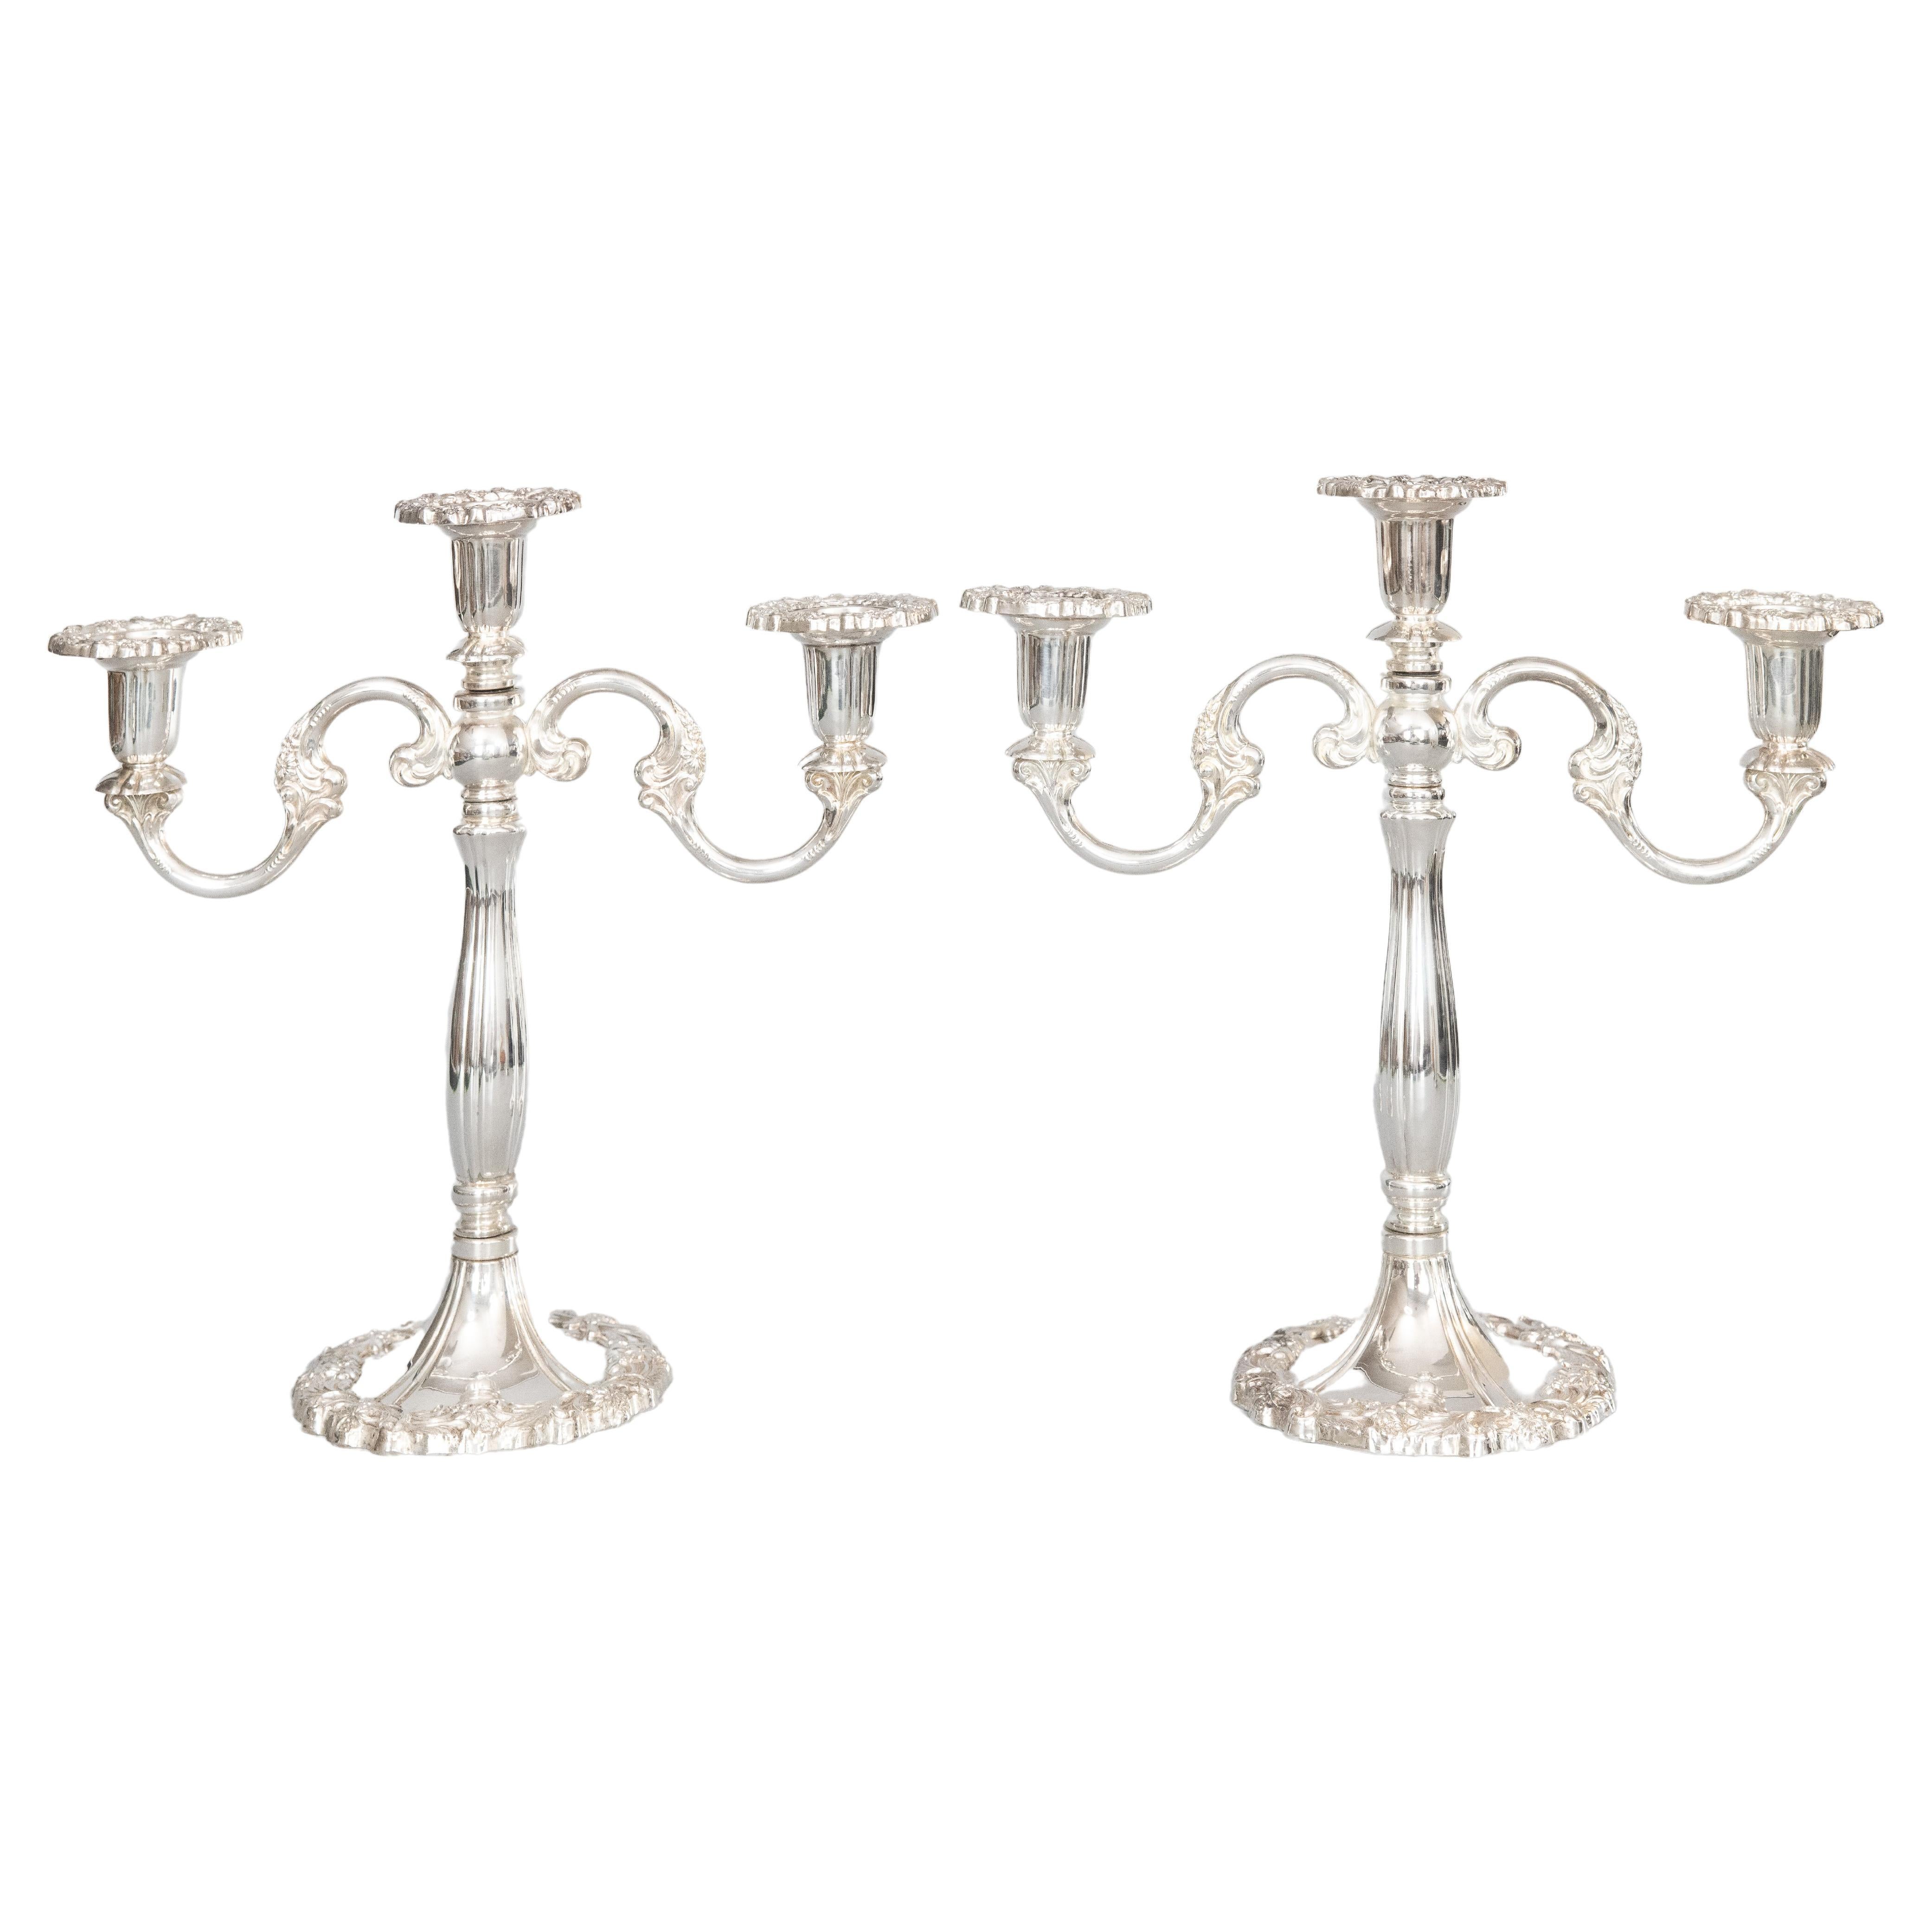 Pair of Mid 20th Century Italian Silver Plate Candelabras